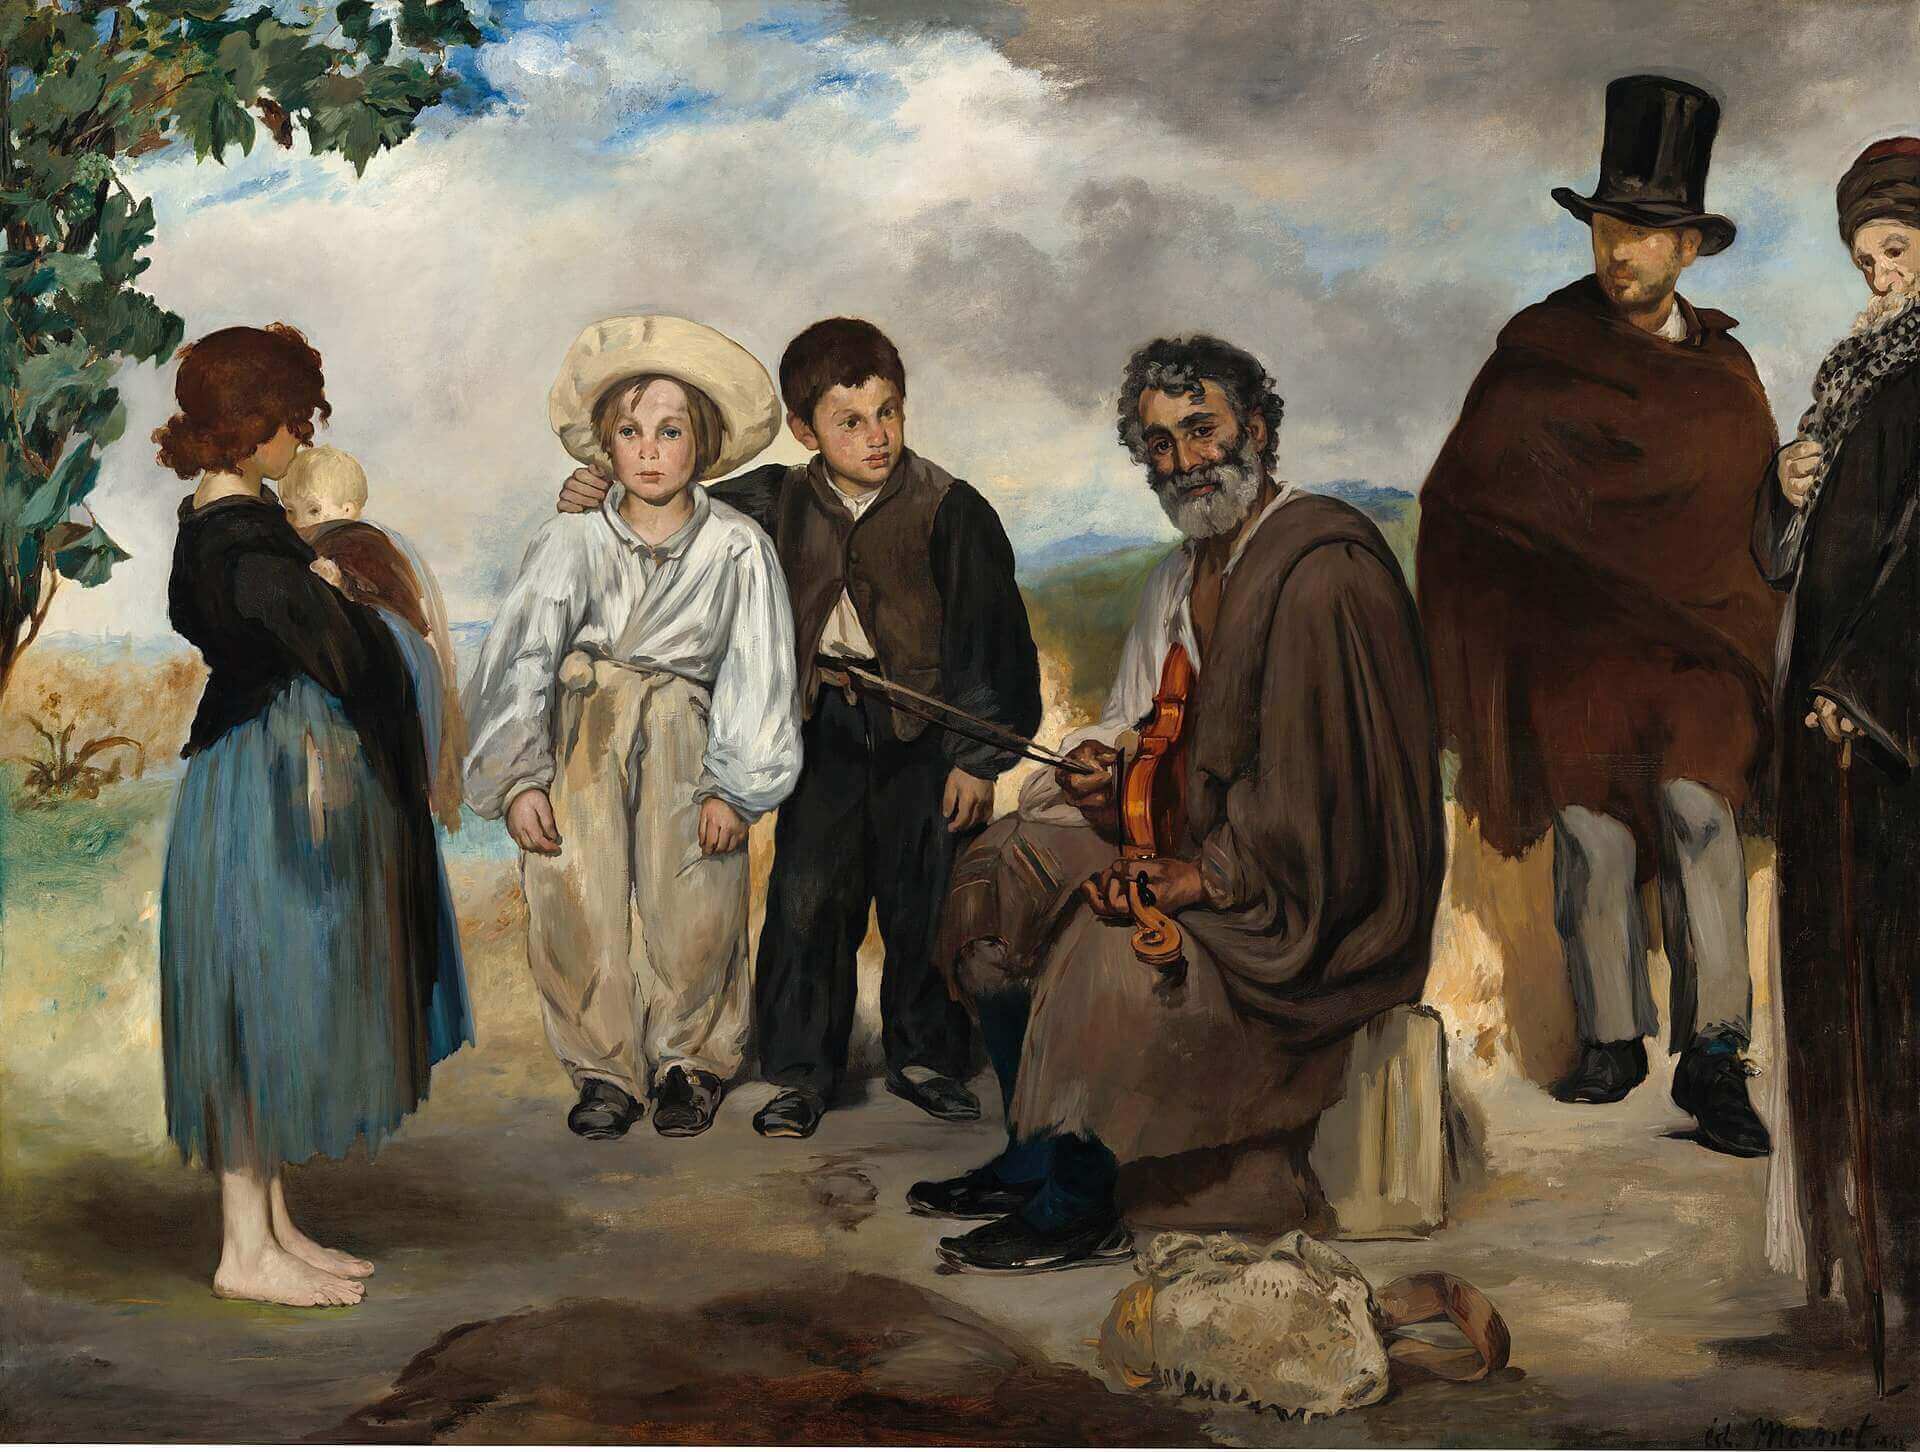 Édouard Manet, The Old Musician, 1862, oil on canvas, 73.8 in × 97.8 inches (National Gallery of Art, Washington, D.C.)